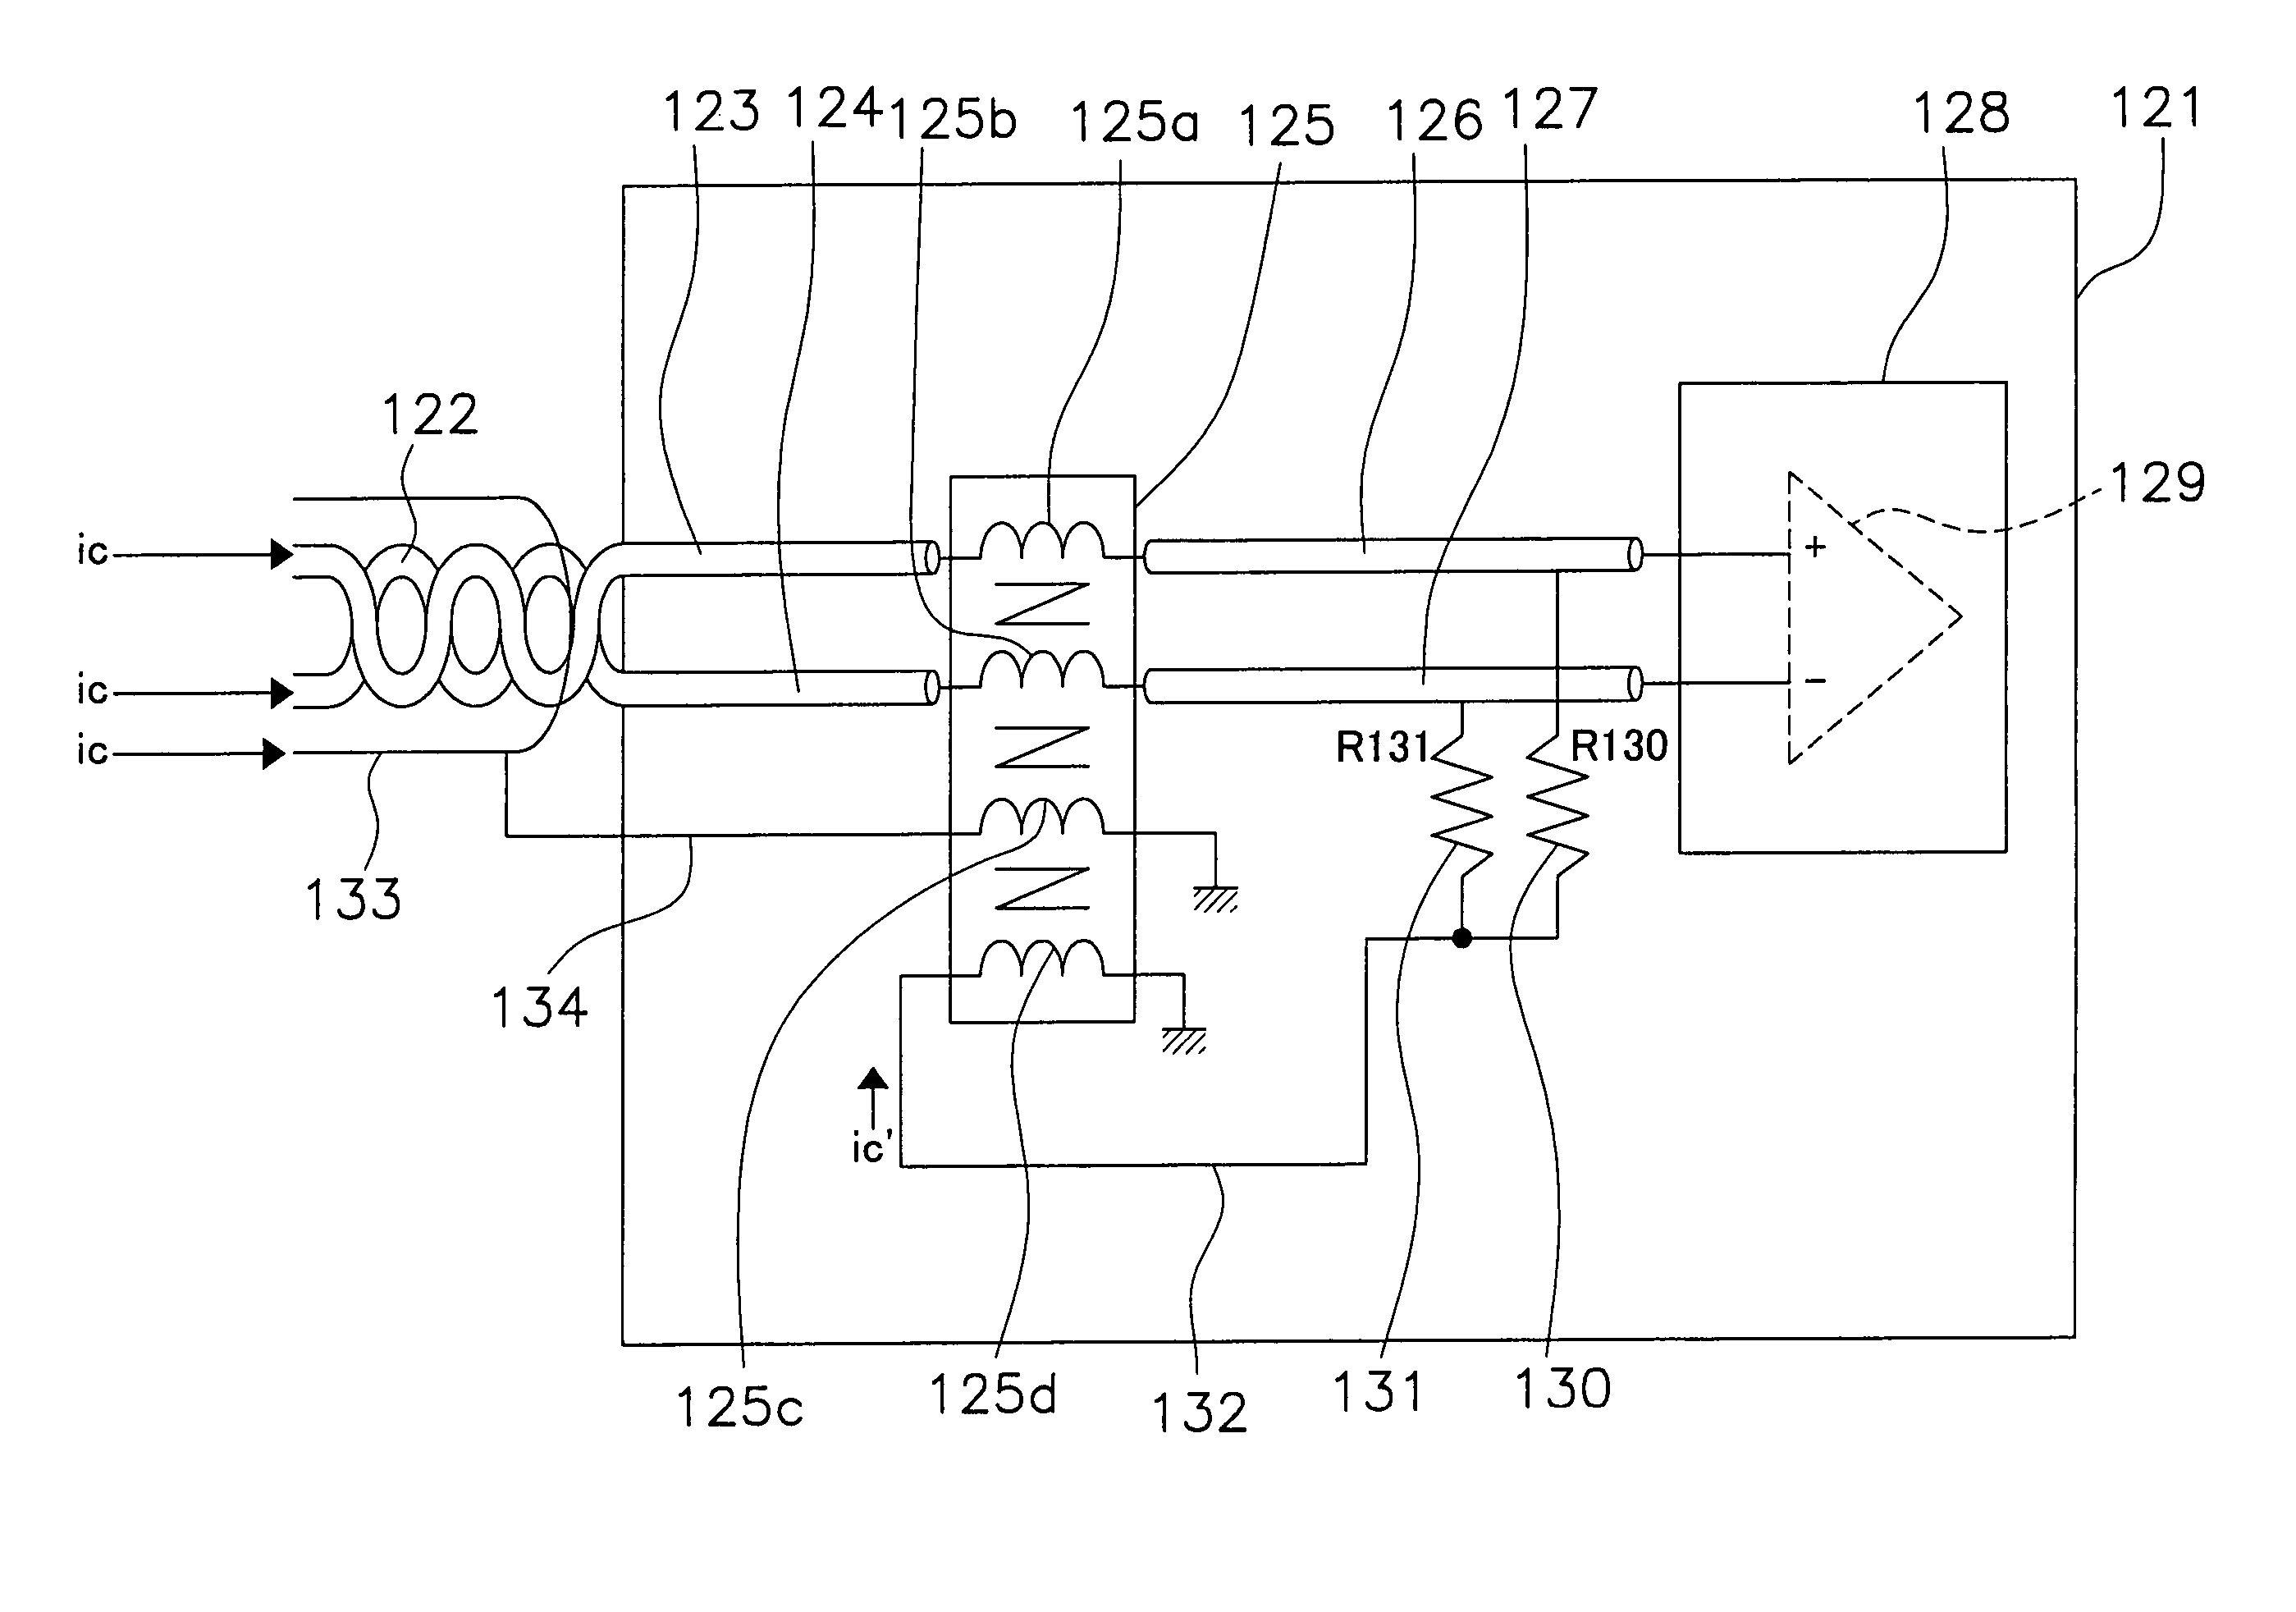 Differential transmission circuit and common mode choke coil